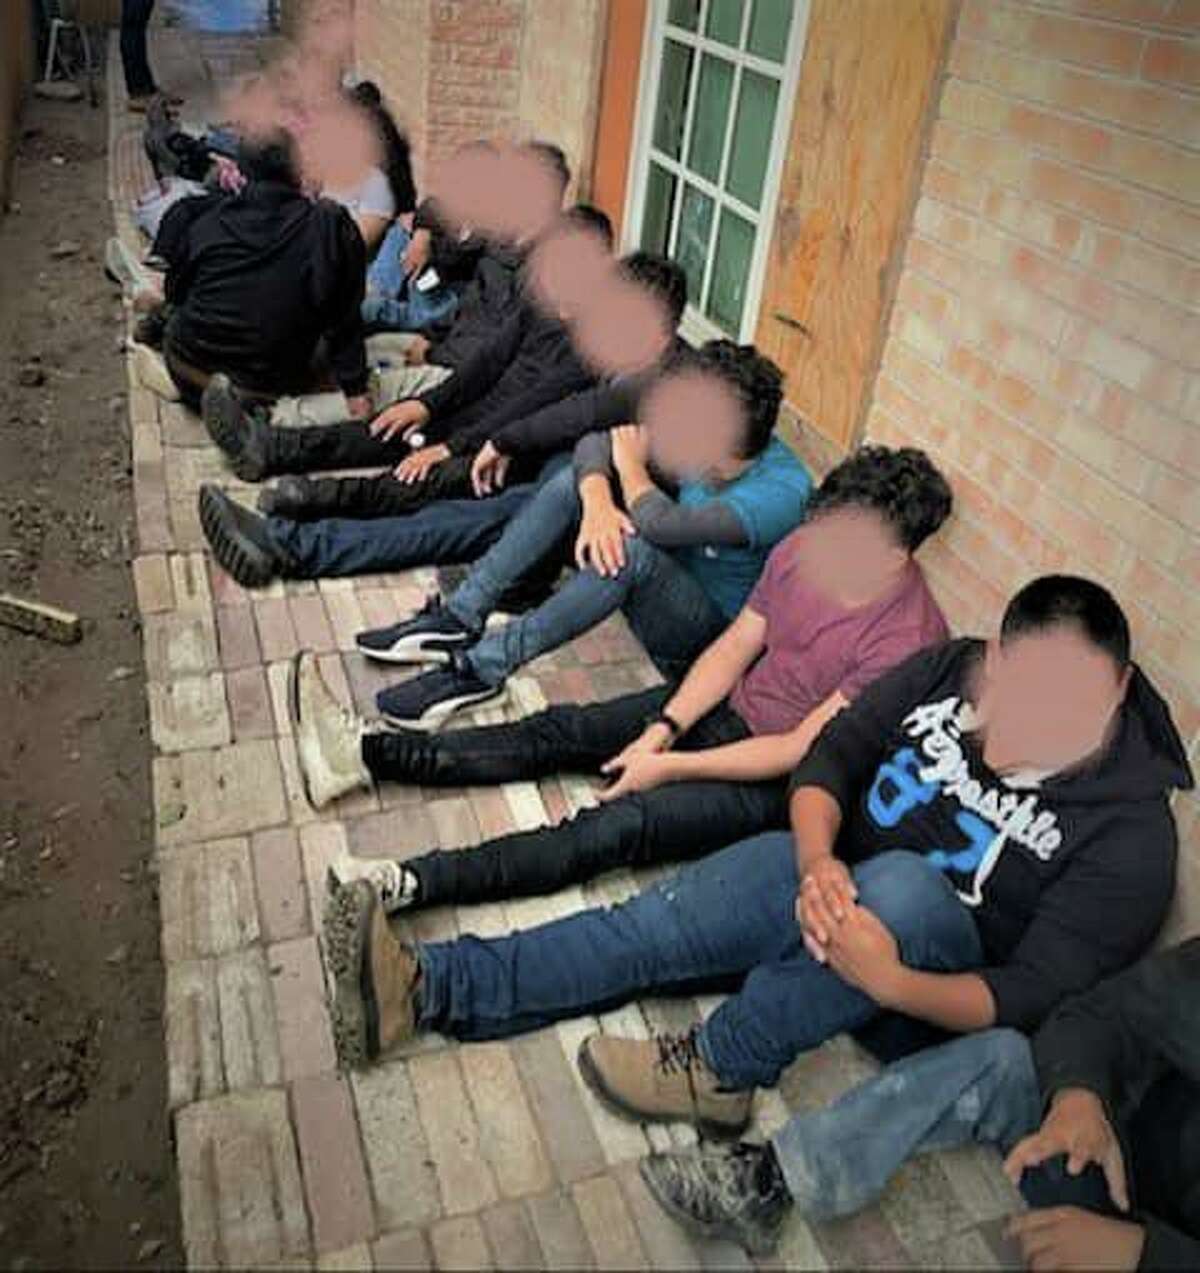 U.S. Border Patrol agents assisted by other local law enforcement discovered a stash house with 25 migrants in west Laredo.